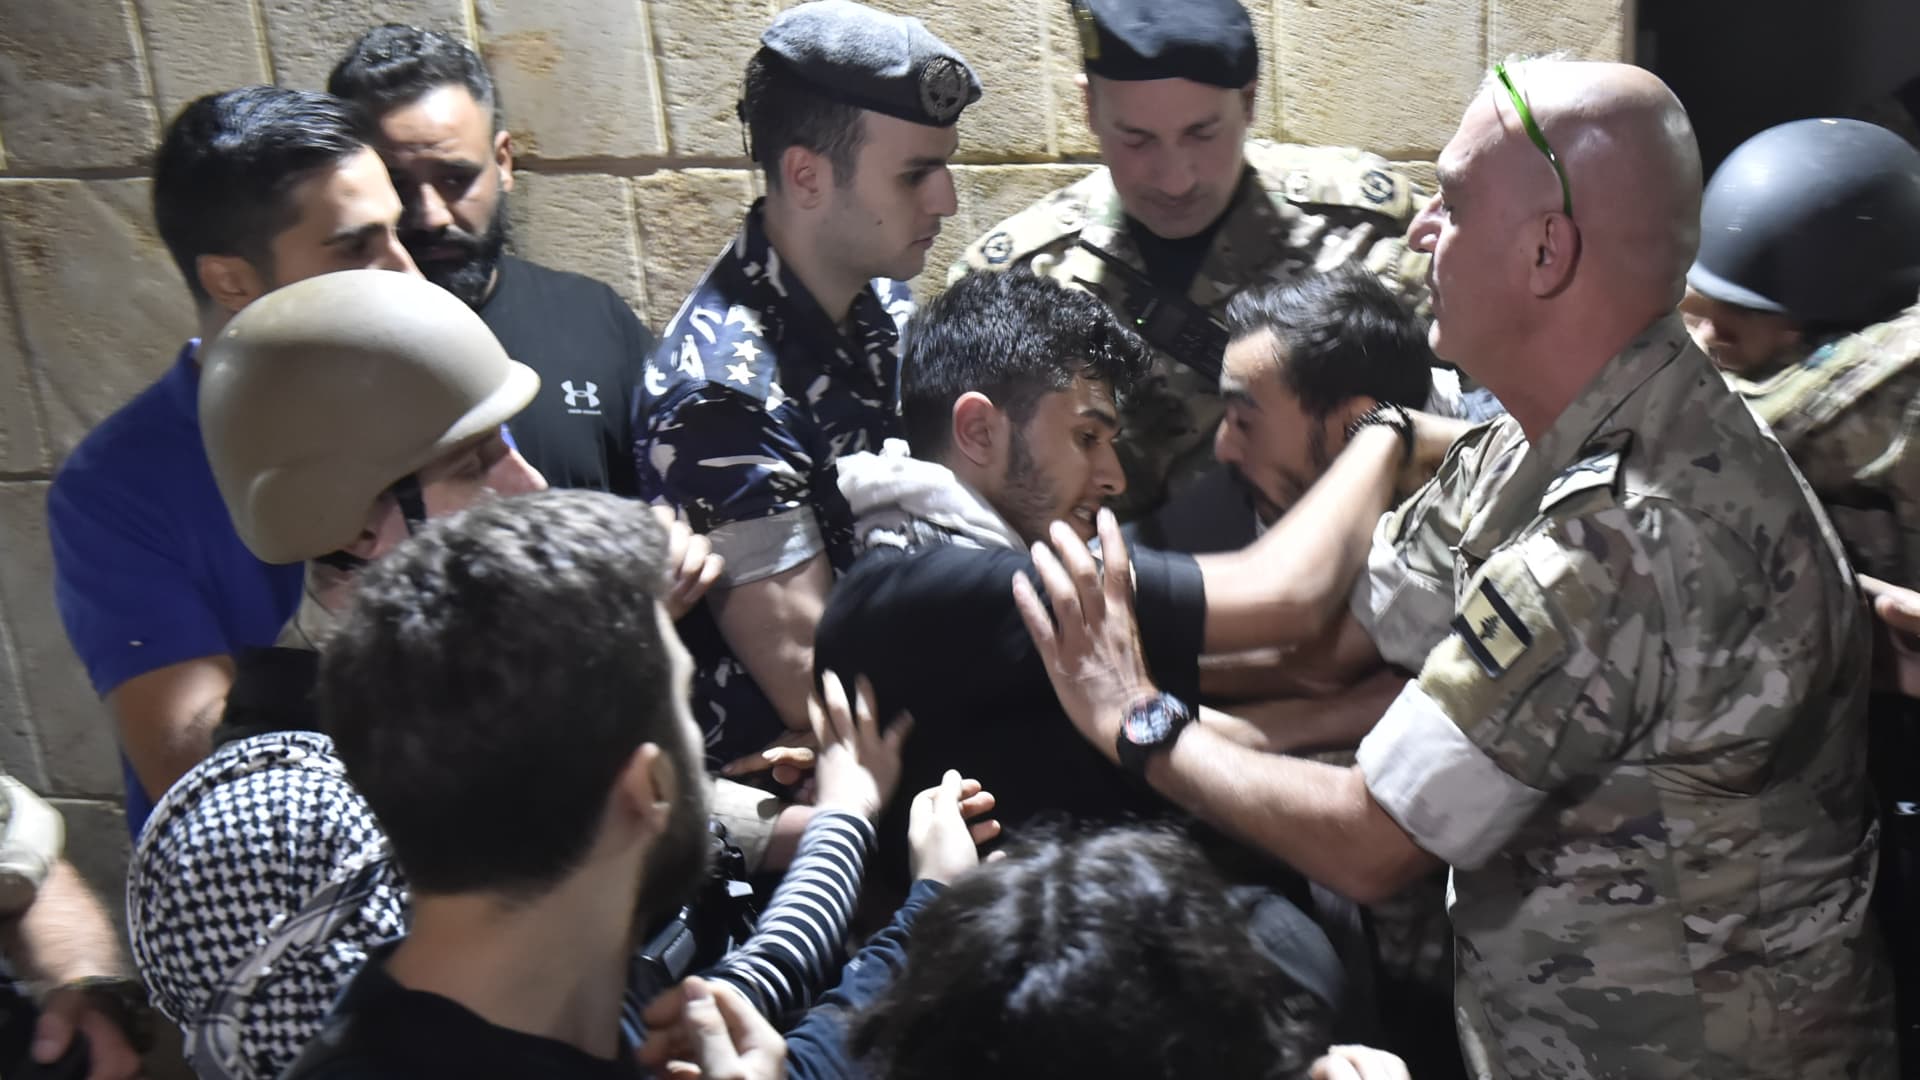 Lebanese police and soldiers intervene in the protest after a blast at Al-Ahli Baptist Hospital in Gaza, staged in front of the French Embassy building in Beirut, Lebanon on October 17, 2023. (Photo by Houssam Shbaro/Anadolu via Getty Images)